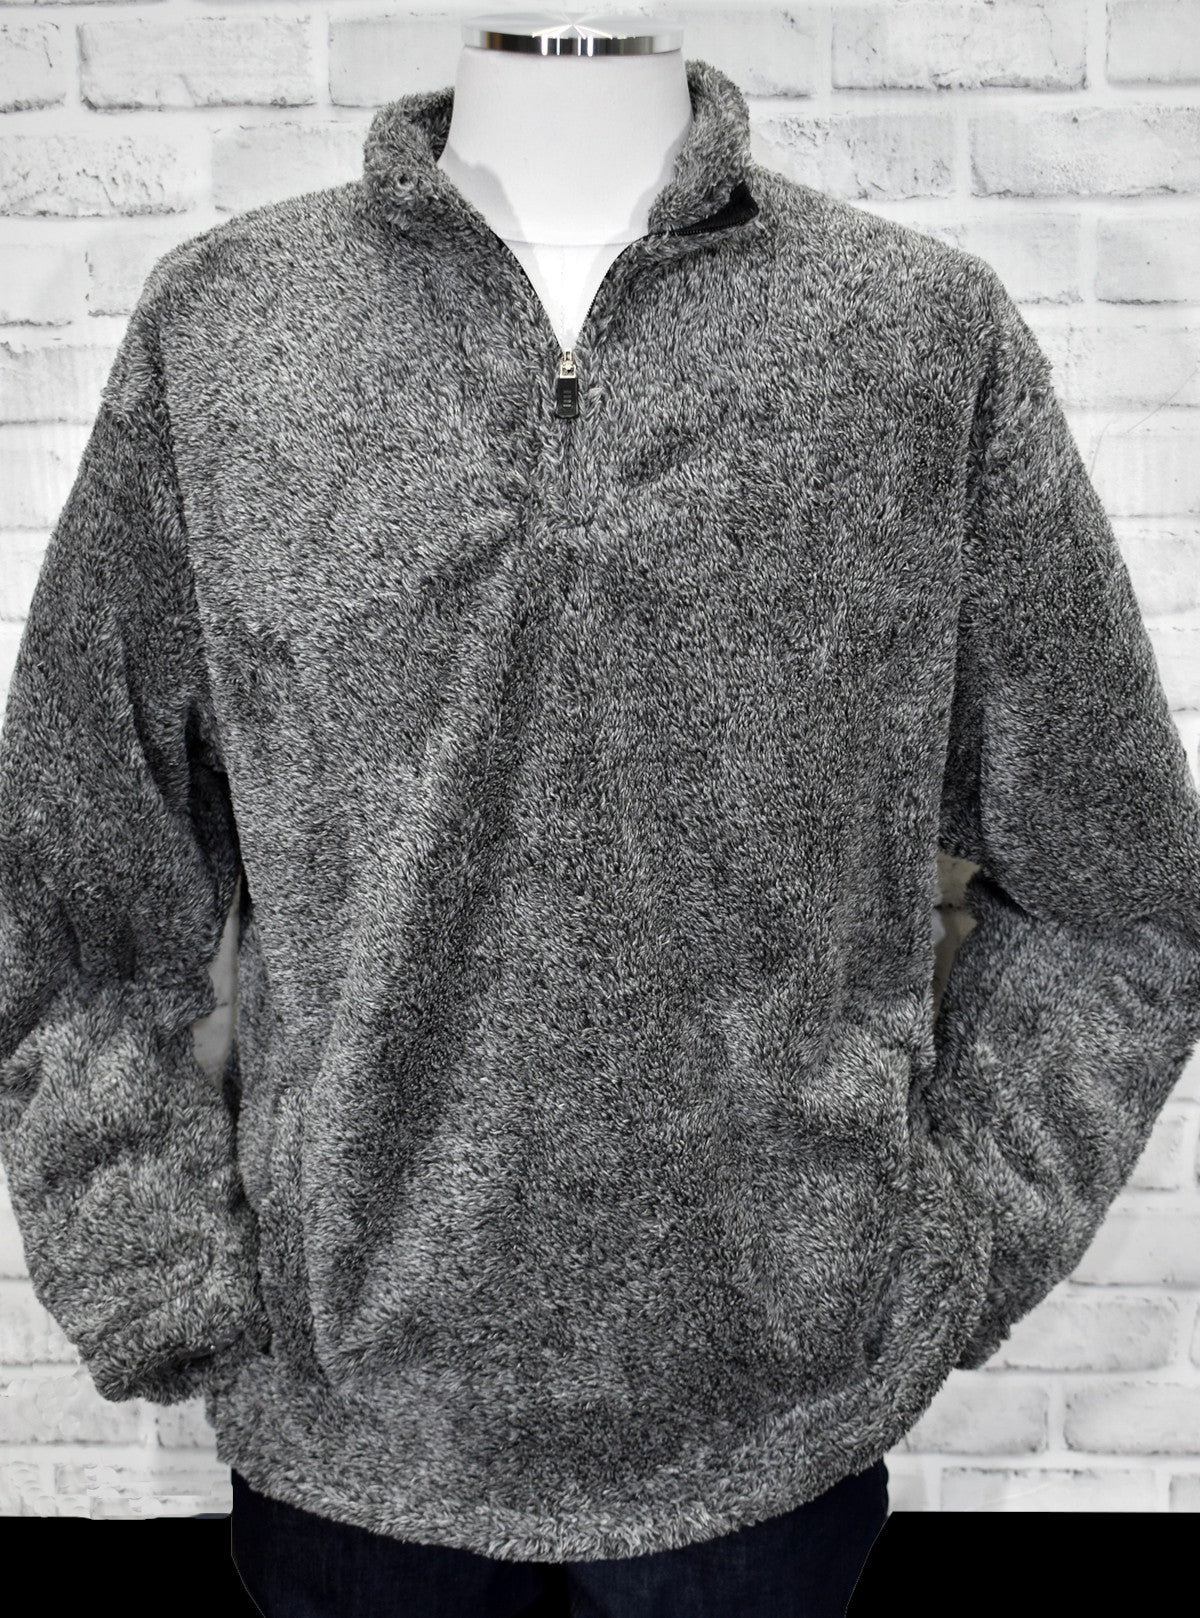 Great item for when you need to throw on something warm, soft and cool with a pair of jeans or sweats.   The soft grey coloration with a hint of charcoal/black highlights pairs well with any color combination.   Front kangaroo pockets and a soft zip mock for added comfort.  Polymicrofiber fabric, classic fit.